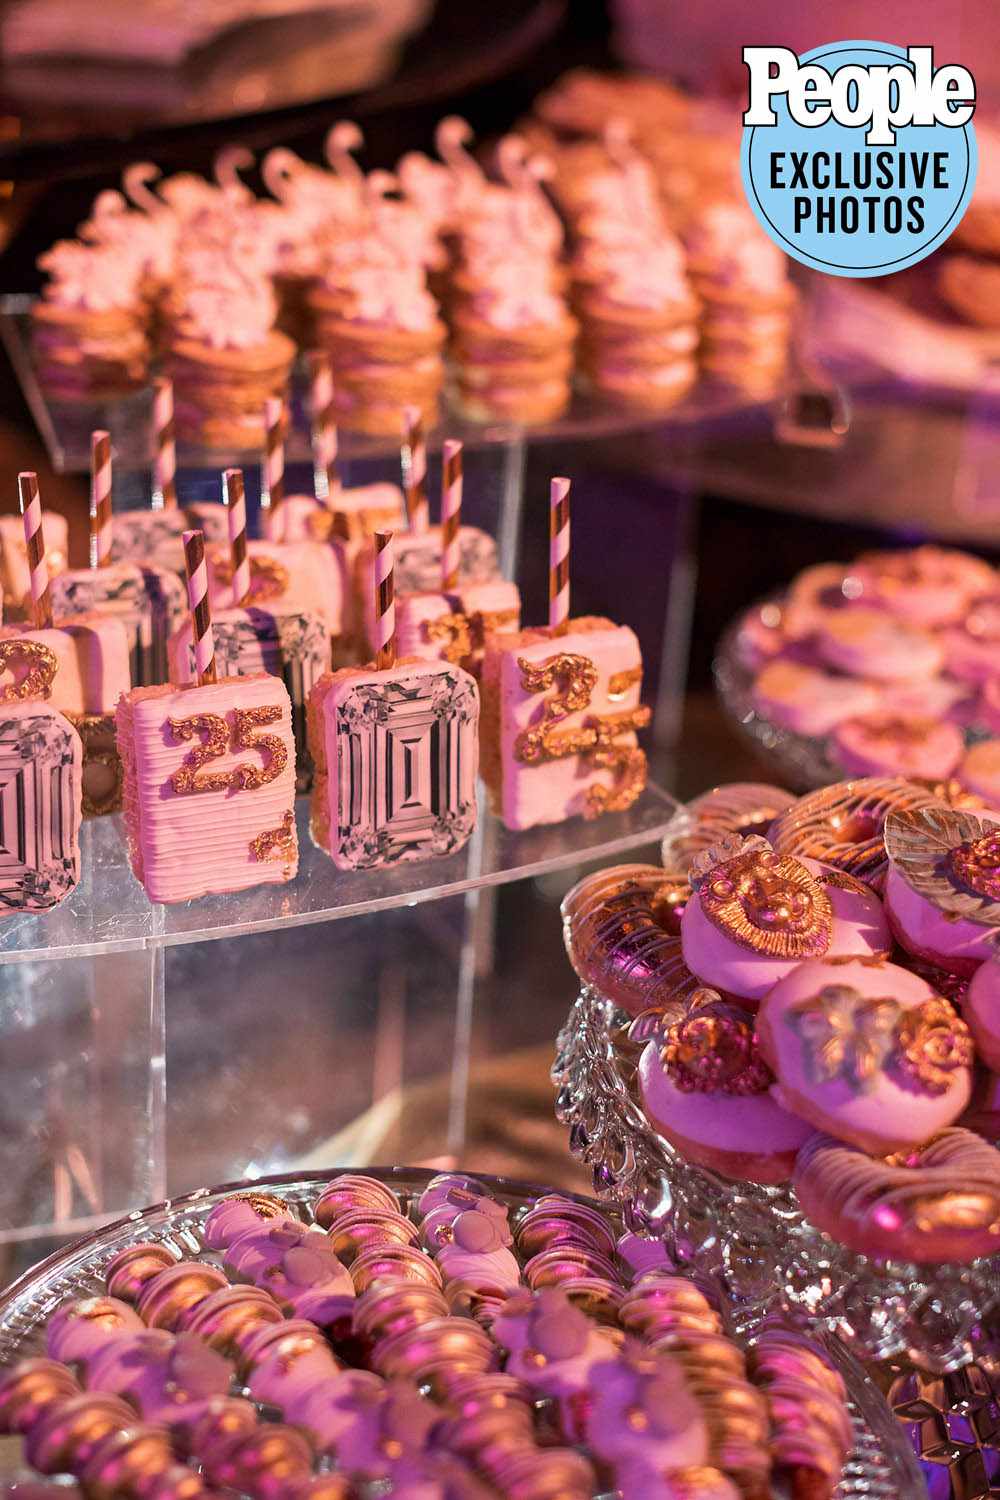 Too Faced's 25th wedding anniversary